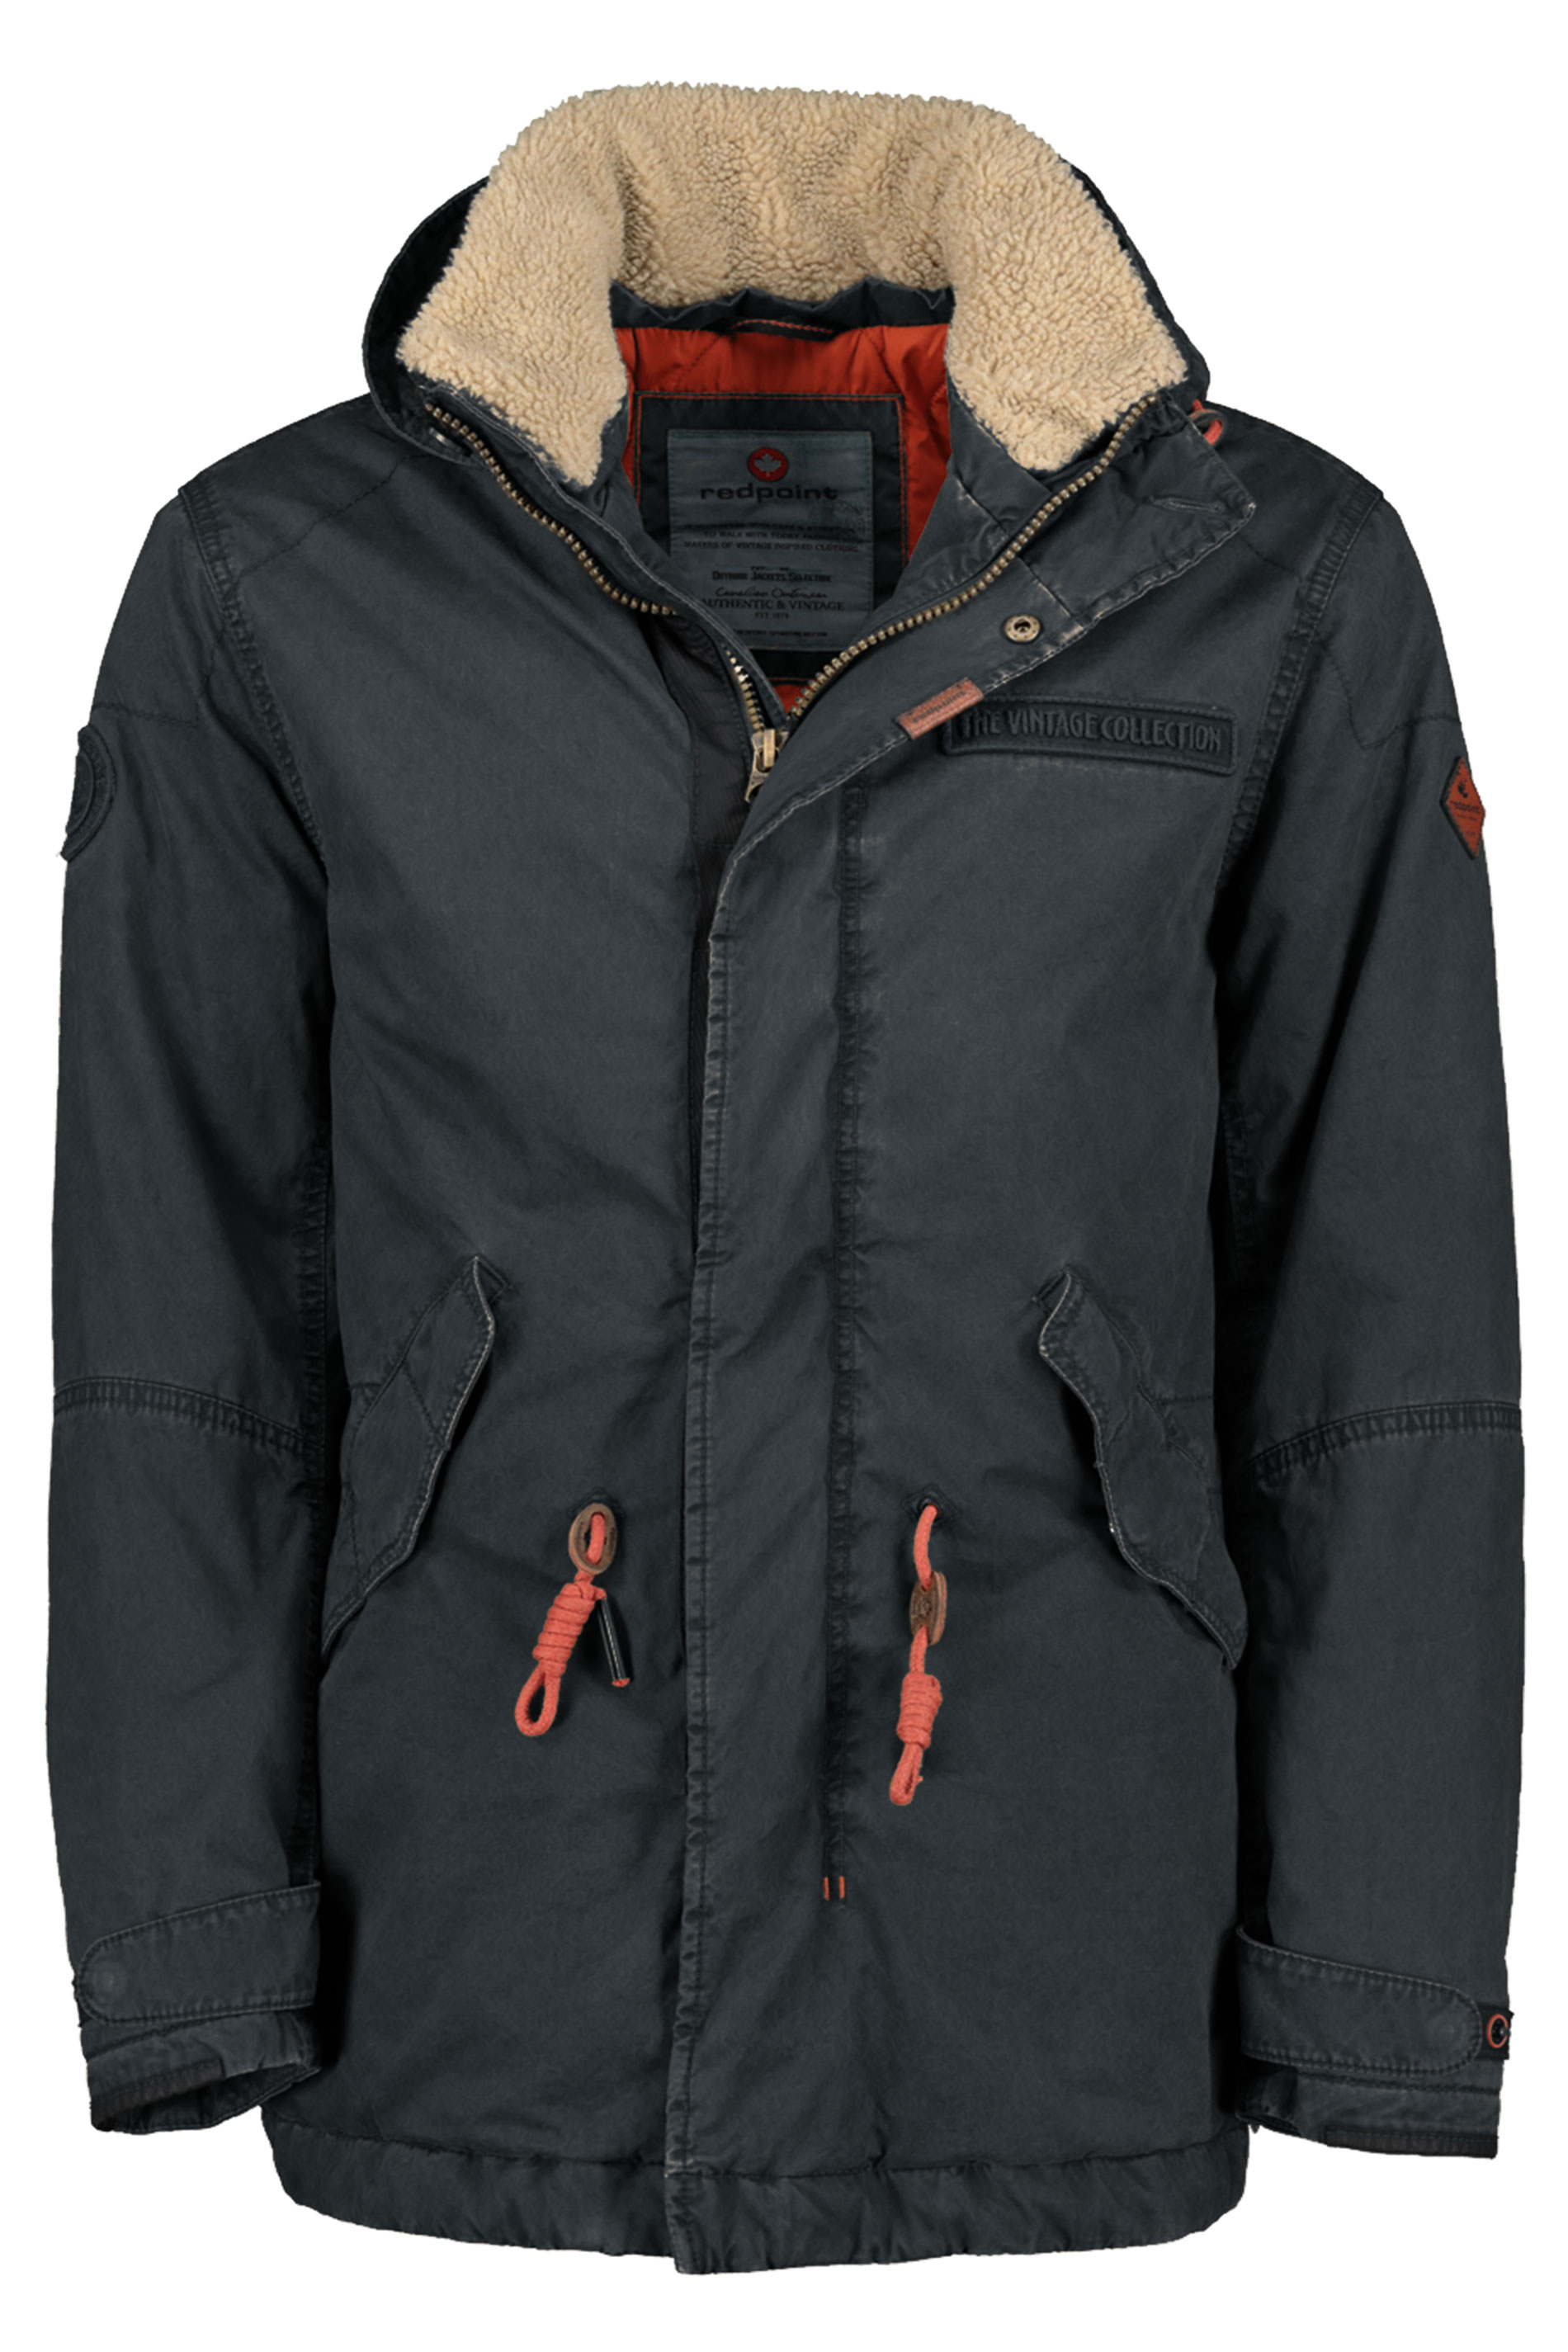 redpoint heated jacket